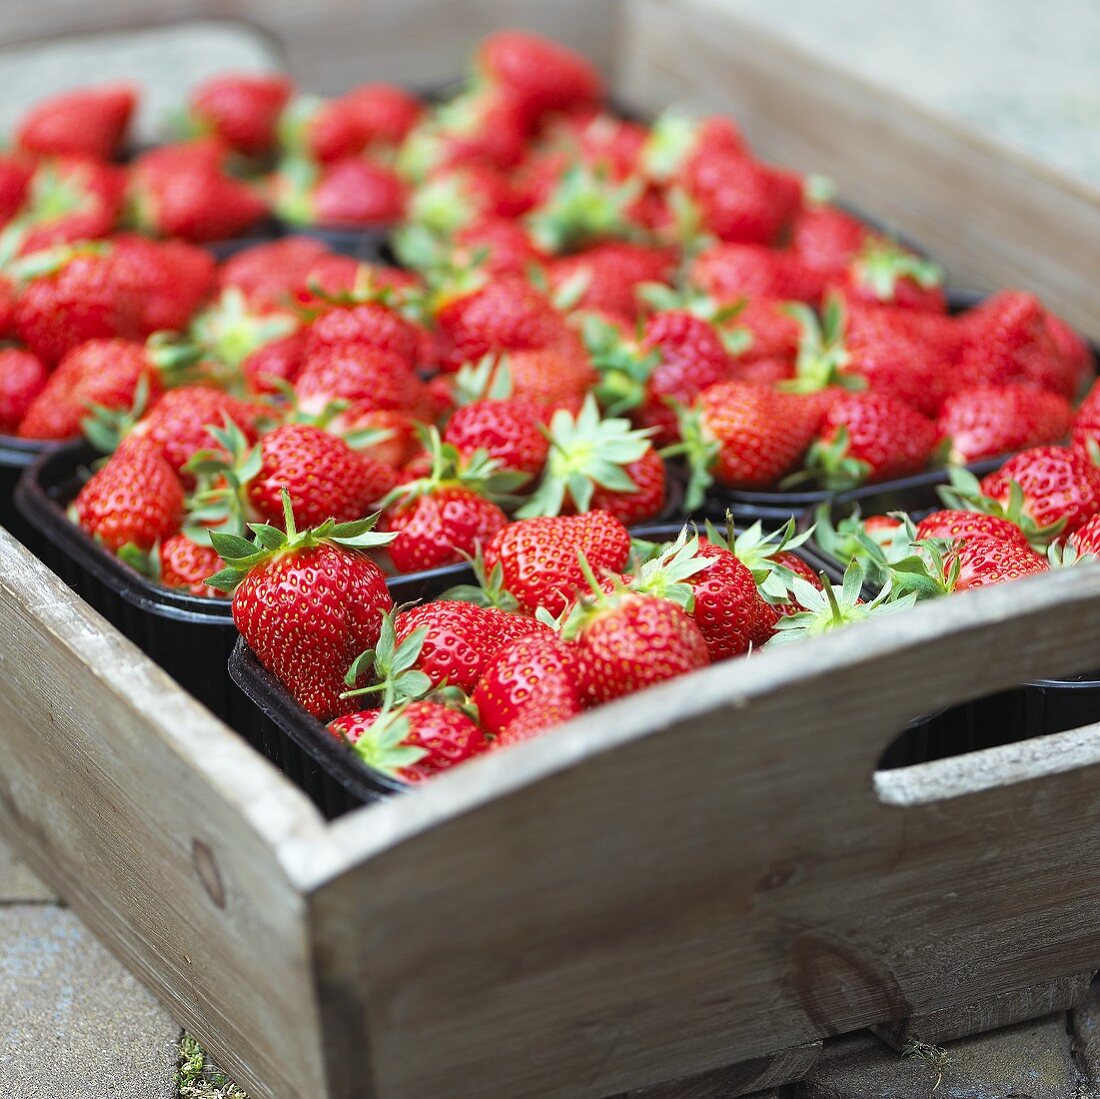 Strawberries in plastic punnets on wooden tray